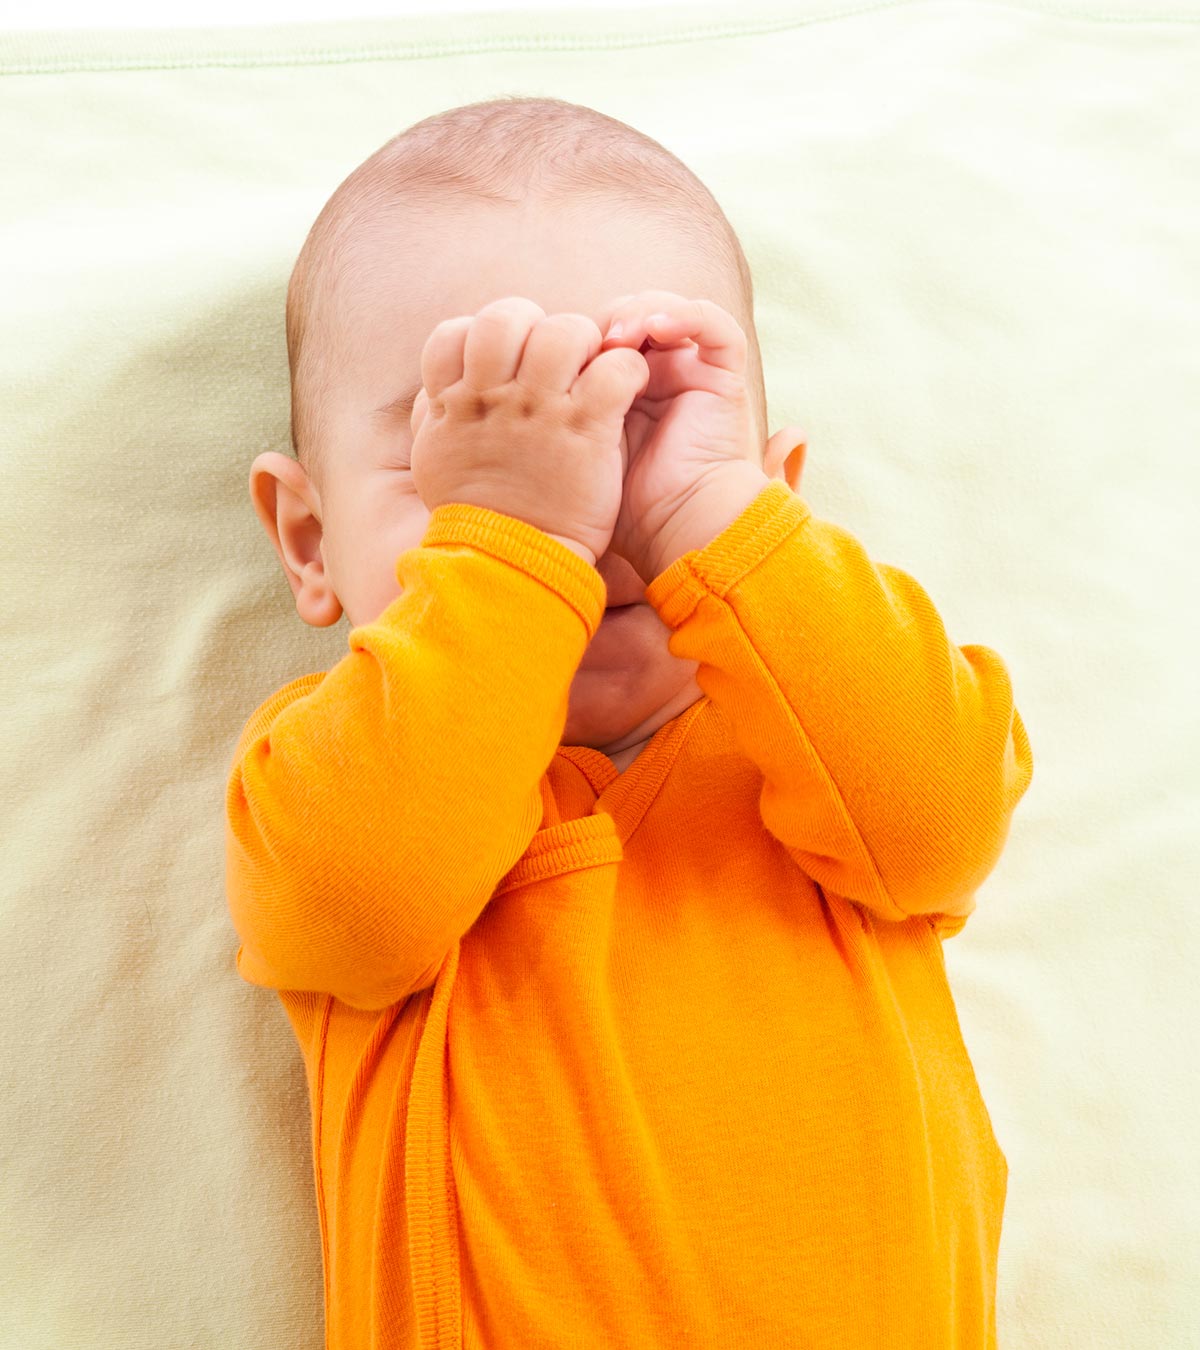 Why Do Babies Rub Their Eyes And How To Prevent Them From Doing It?